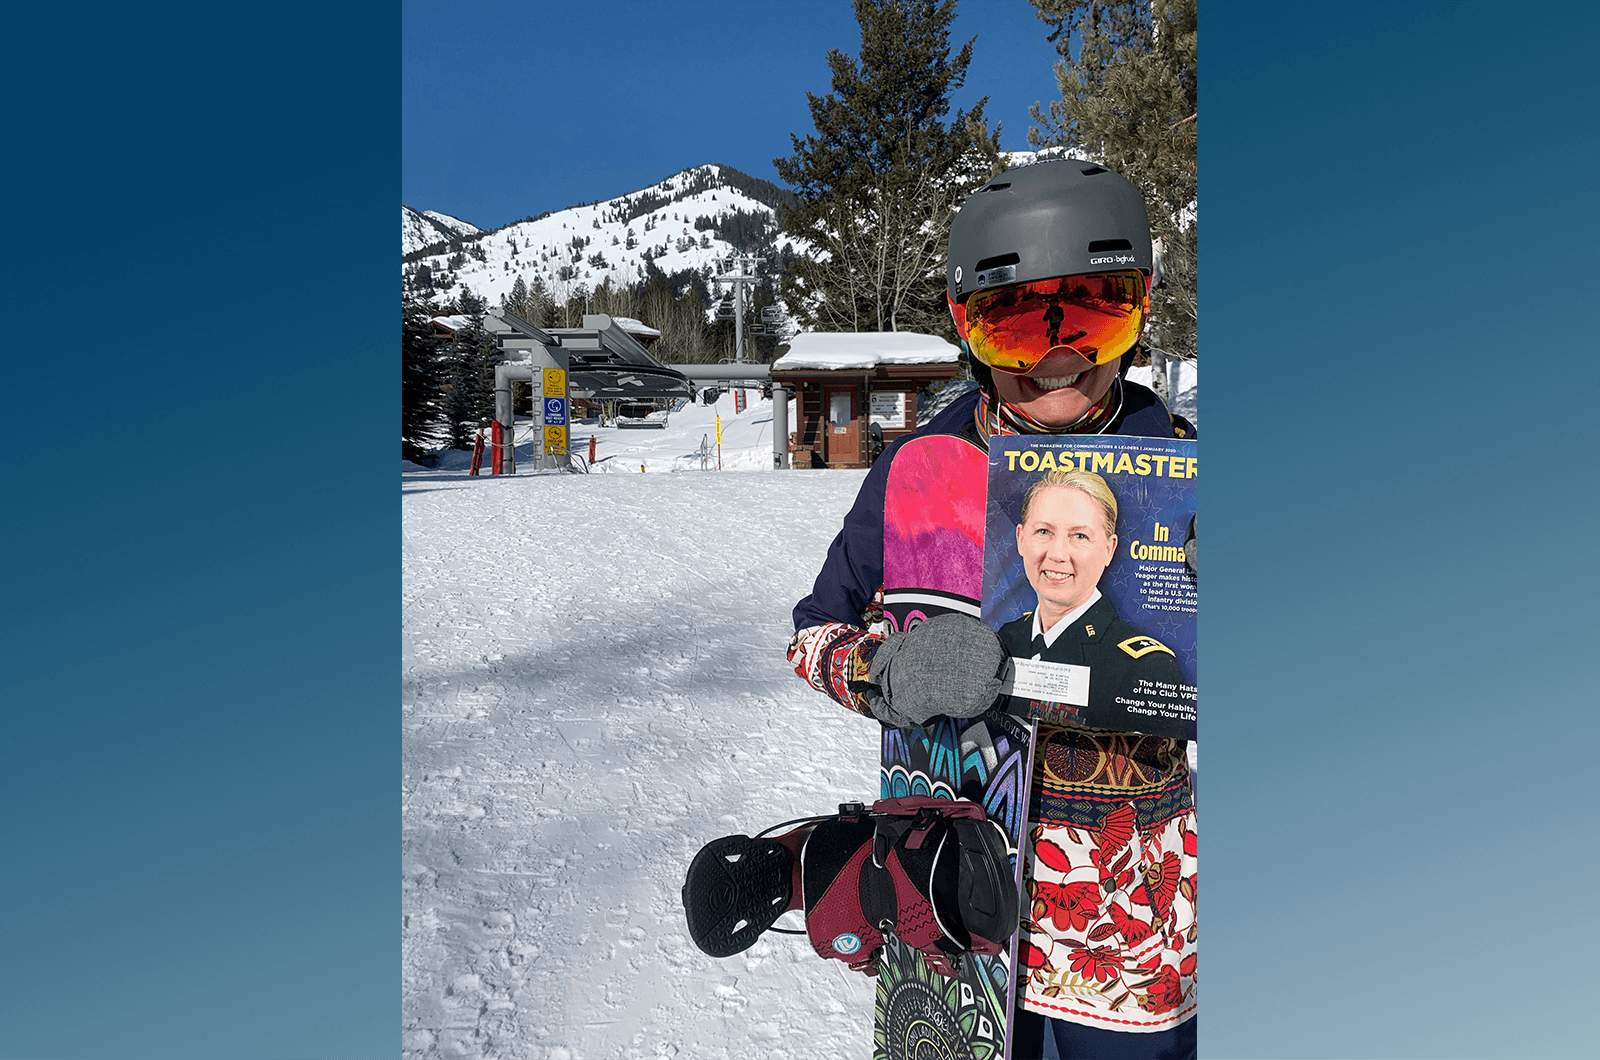 In early 2020, Diana Myers of Decatur, Georgia, enjoyed a snowboarding trip in Jackson Hole, Wyoming